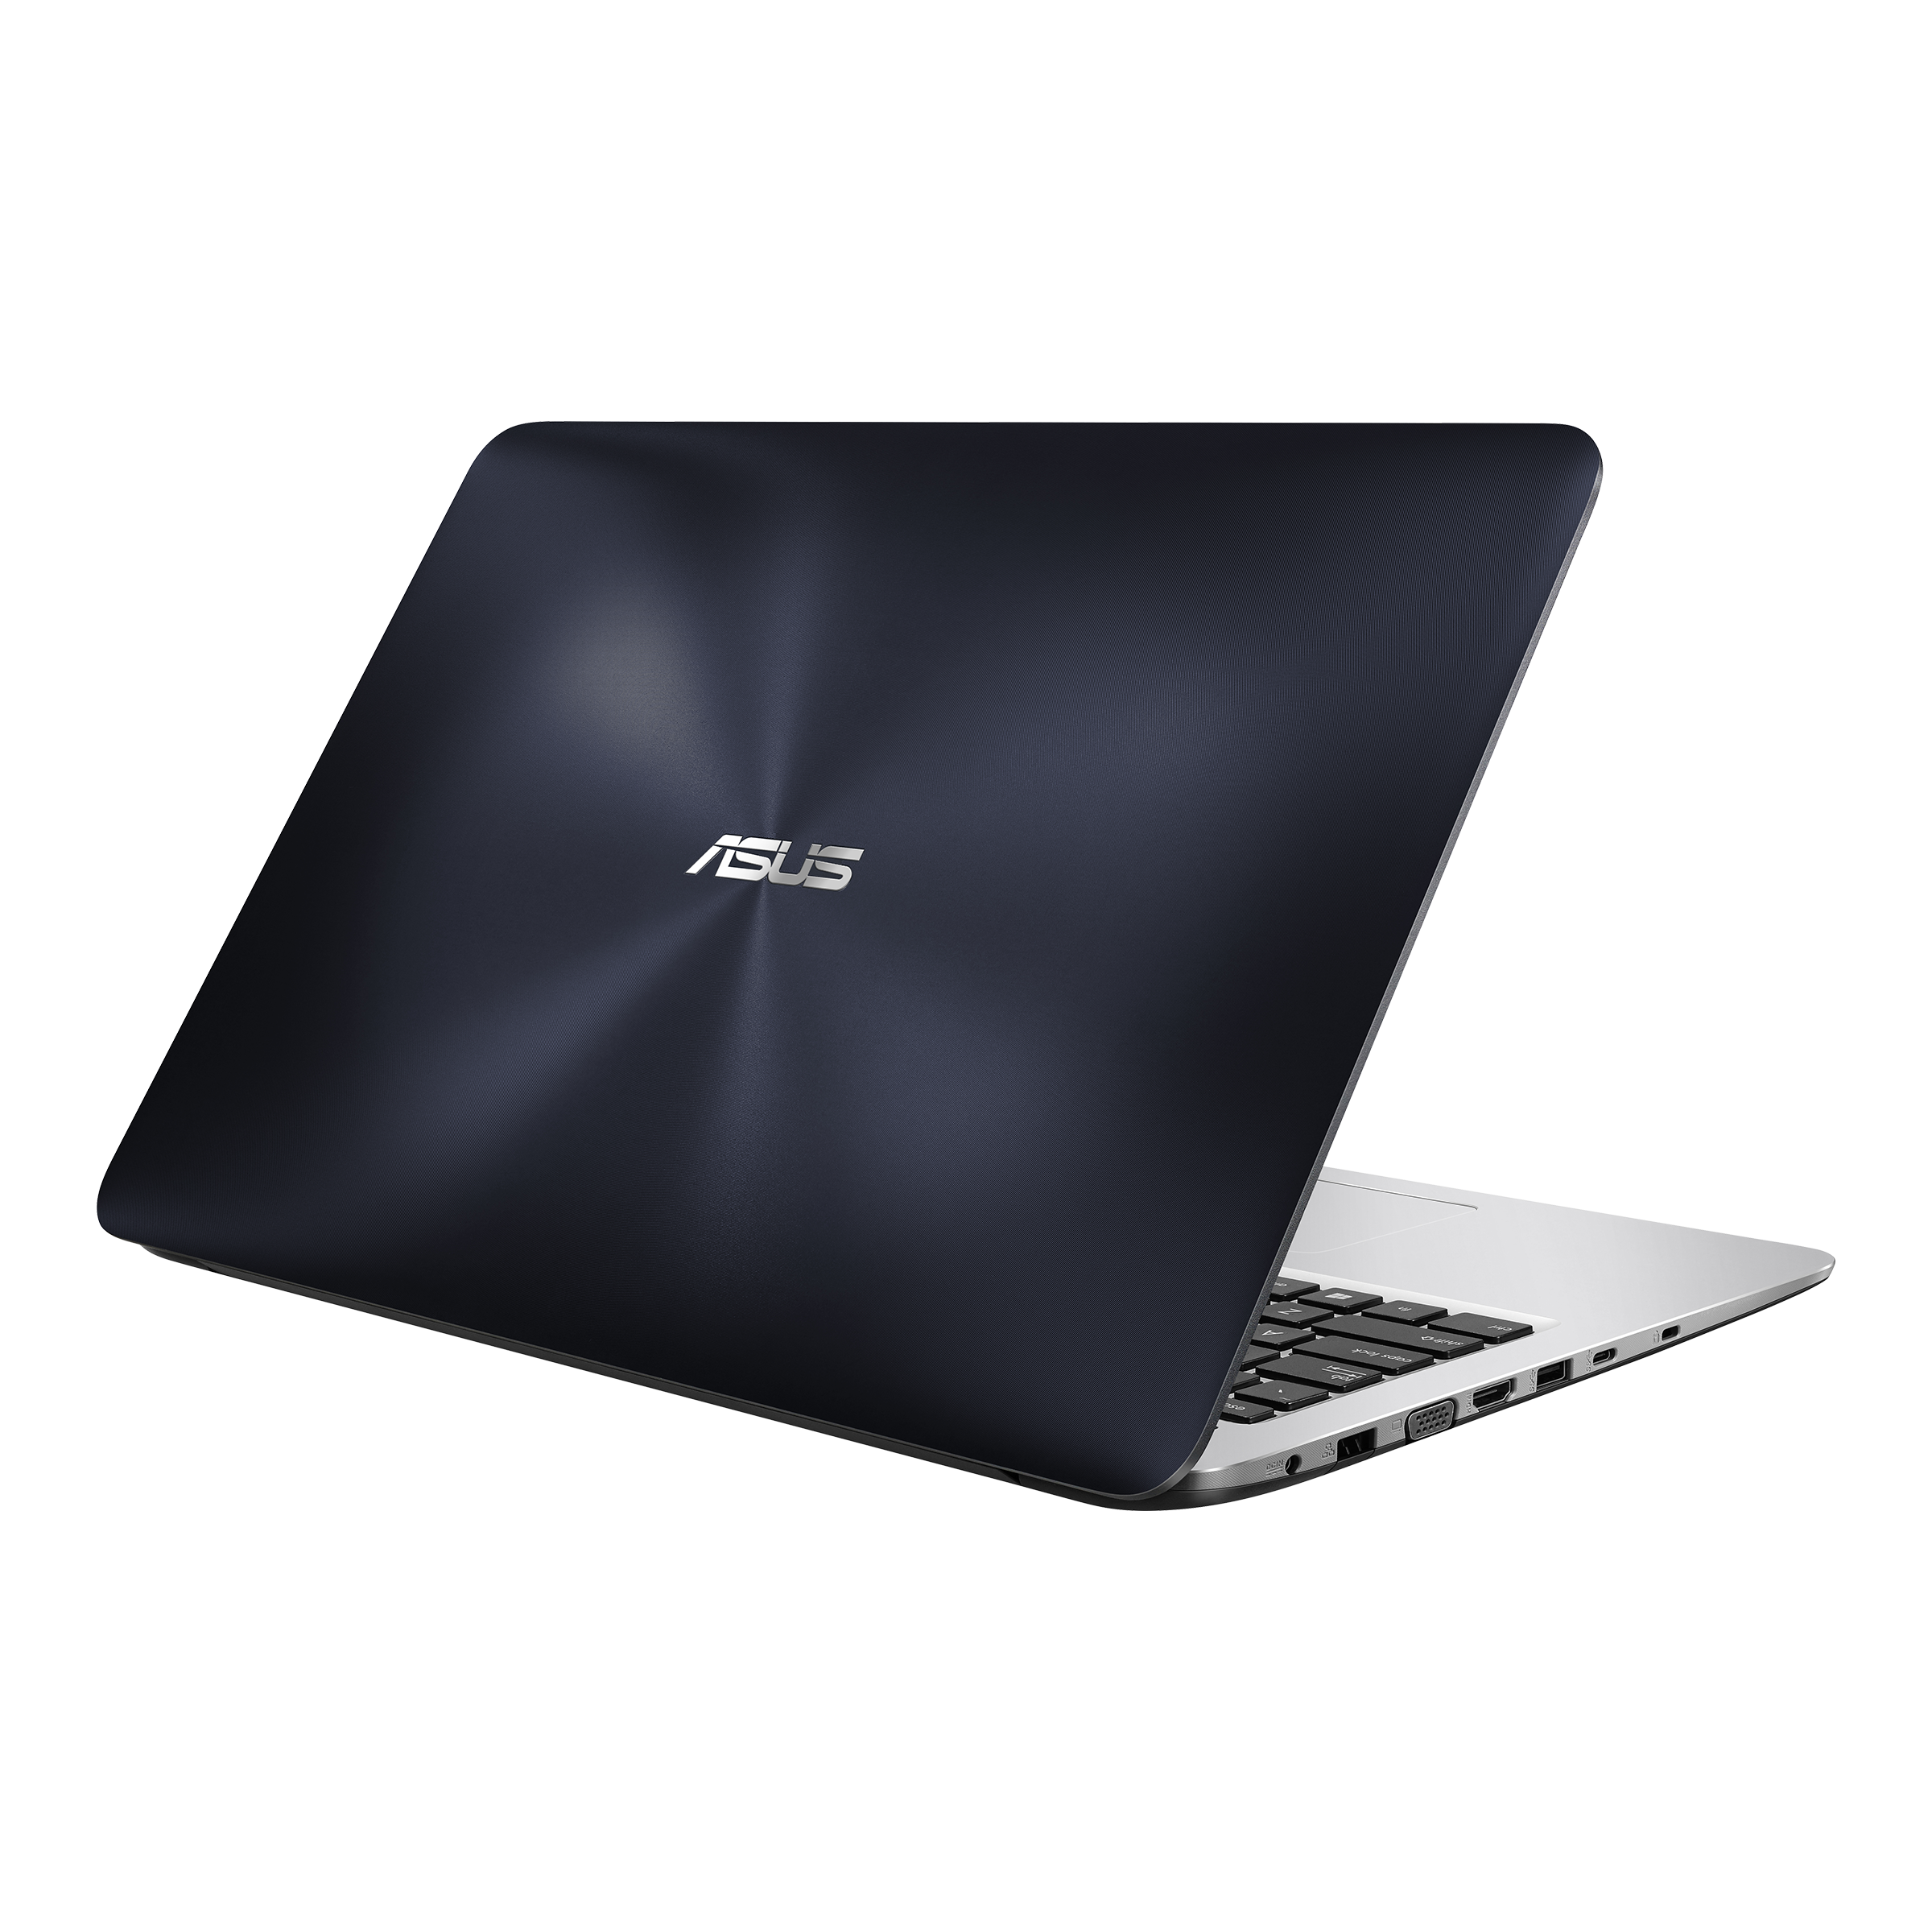 ASUS X556｜Laptops For Global